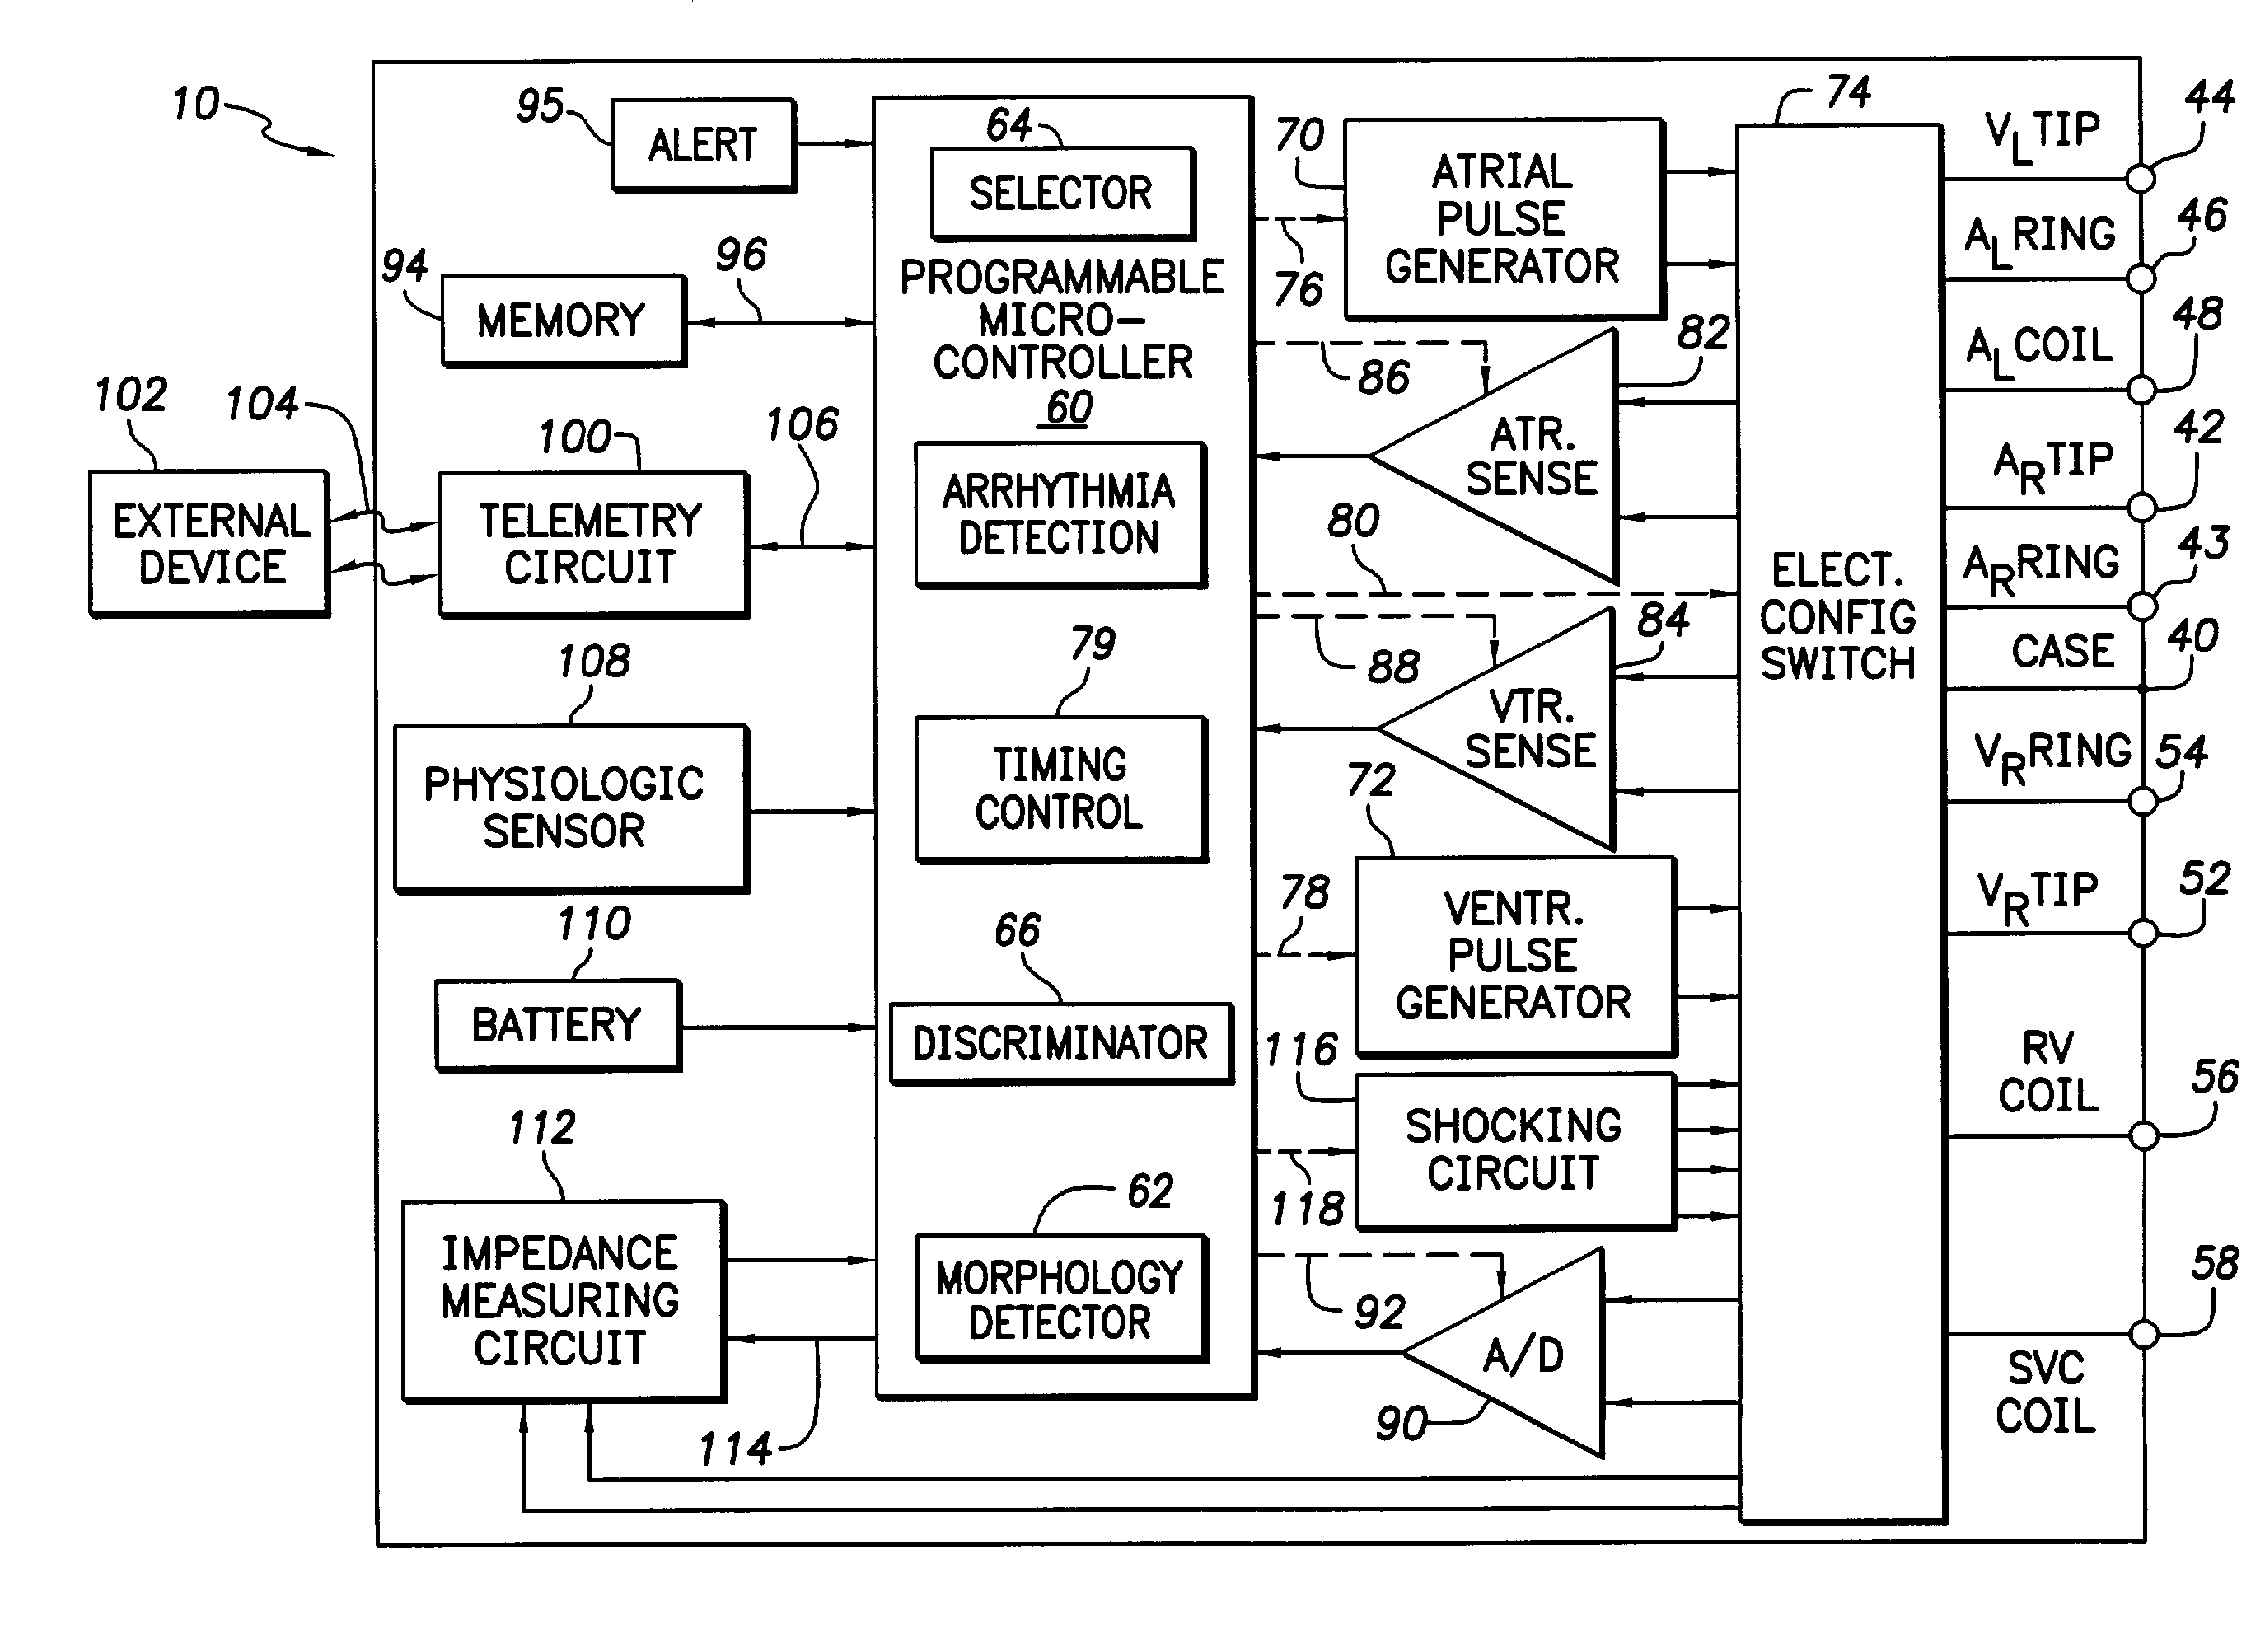 Implantable cardiac device having a system for detecting T wave alternan patterns and method